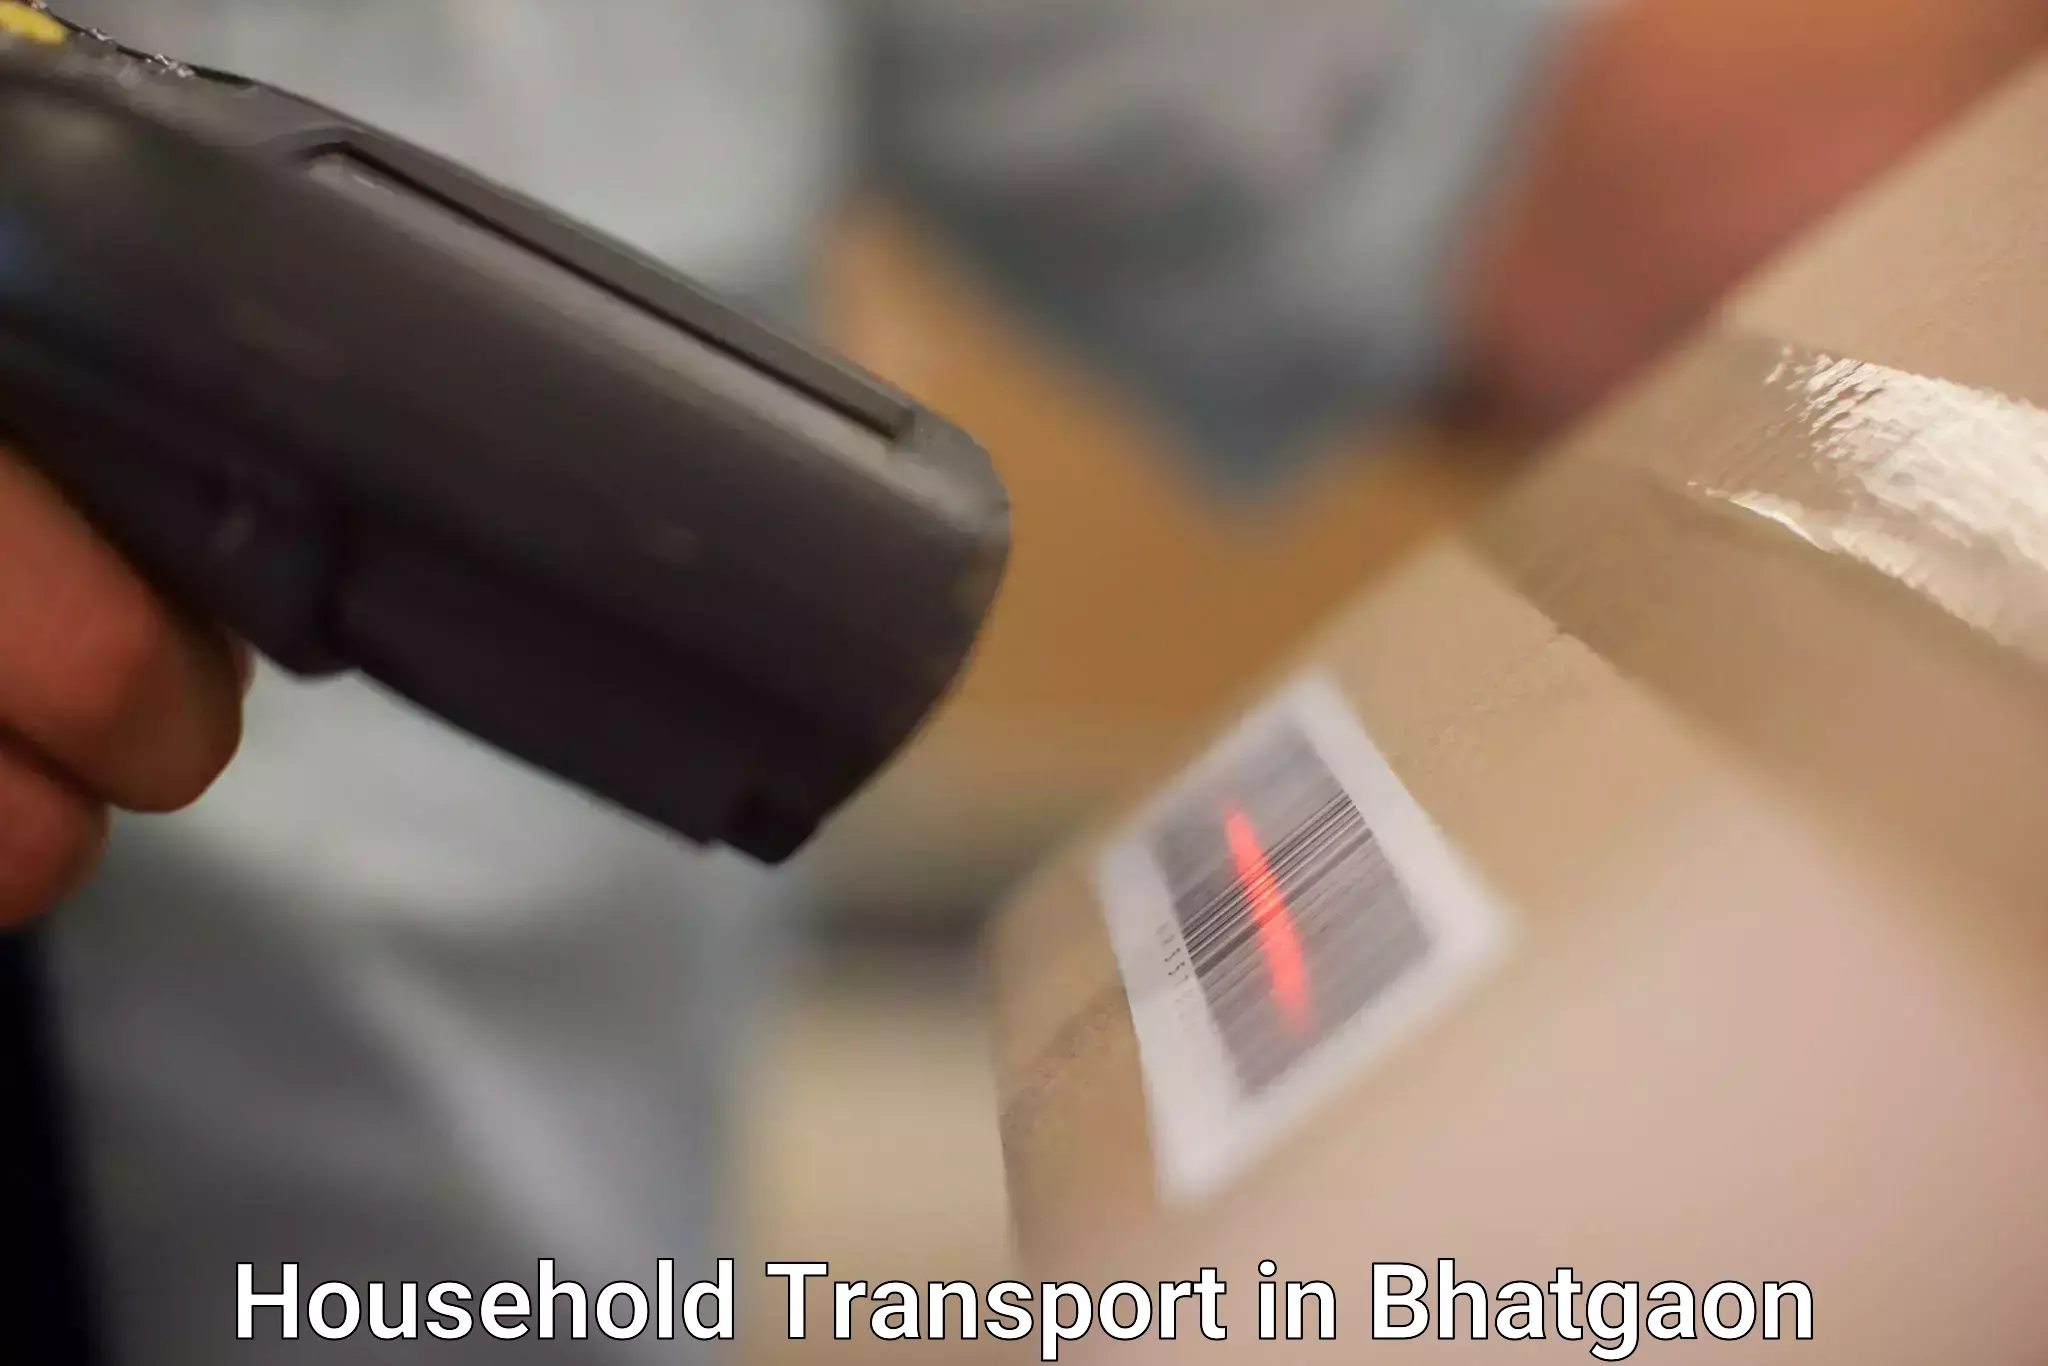 Household transport services in Bhatgaon